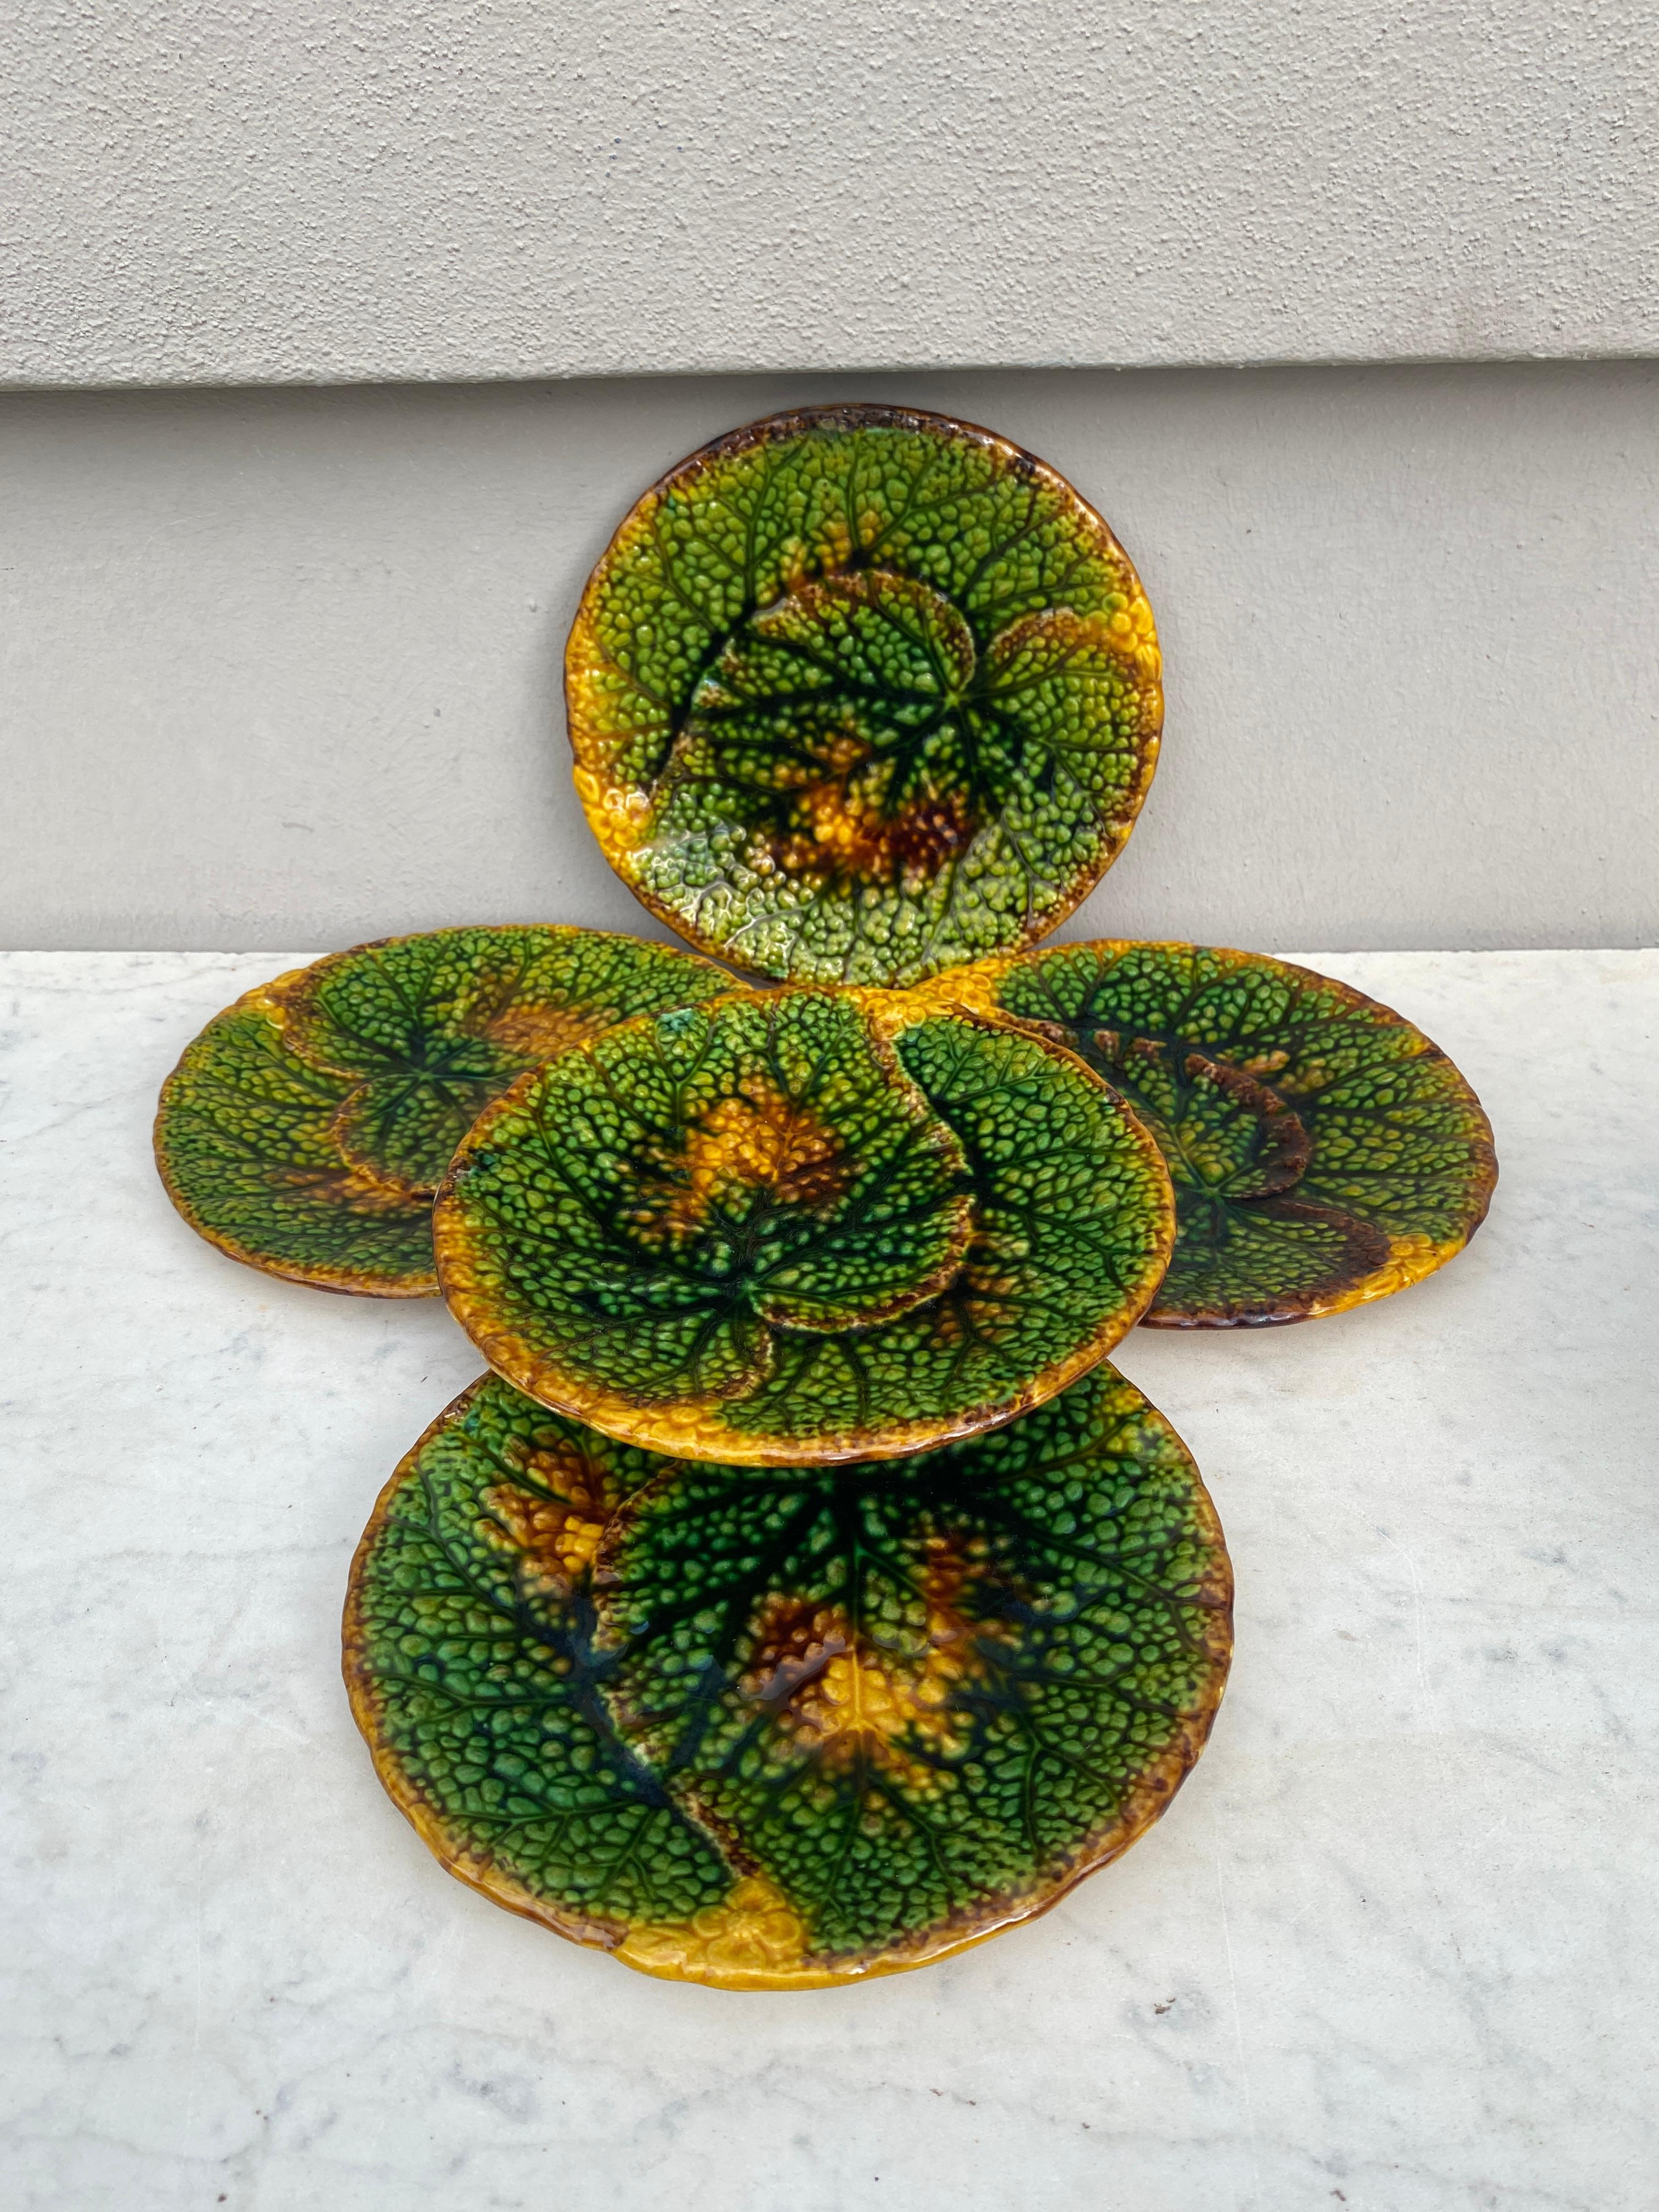 19th Century German Majolica Begonia Plate In Good Condition For Sale In Austin, TX